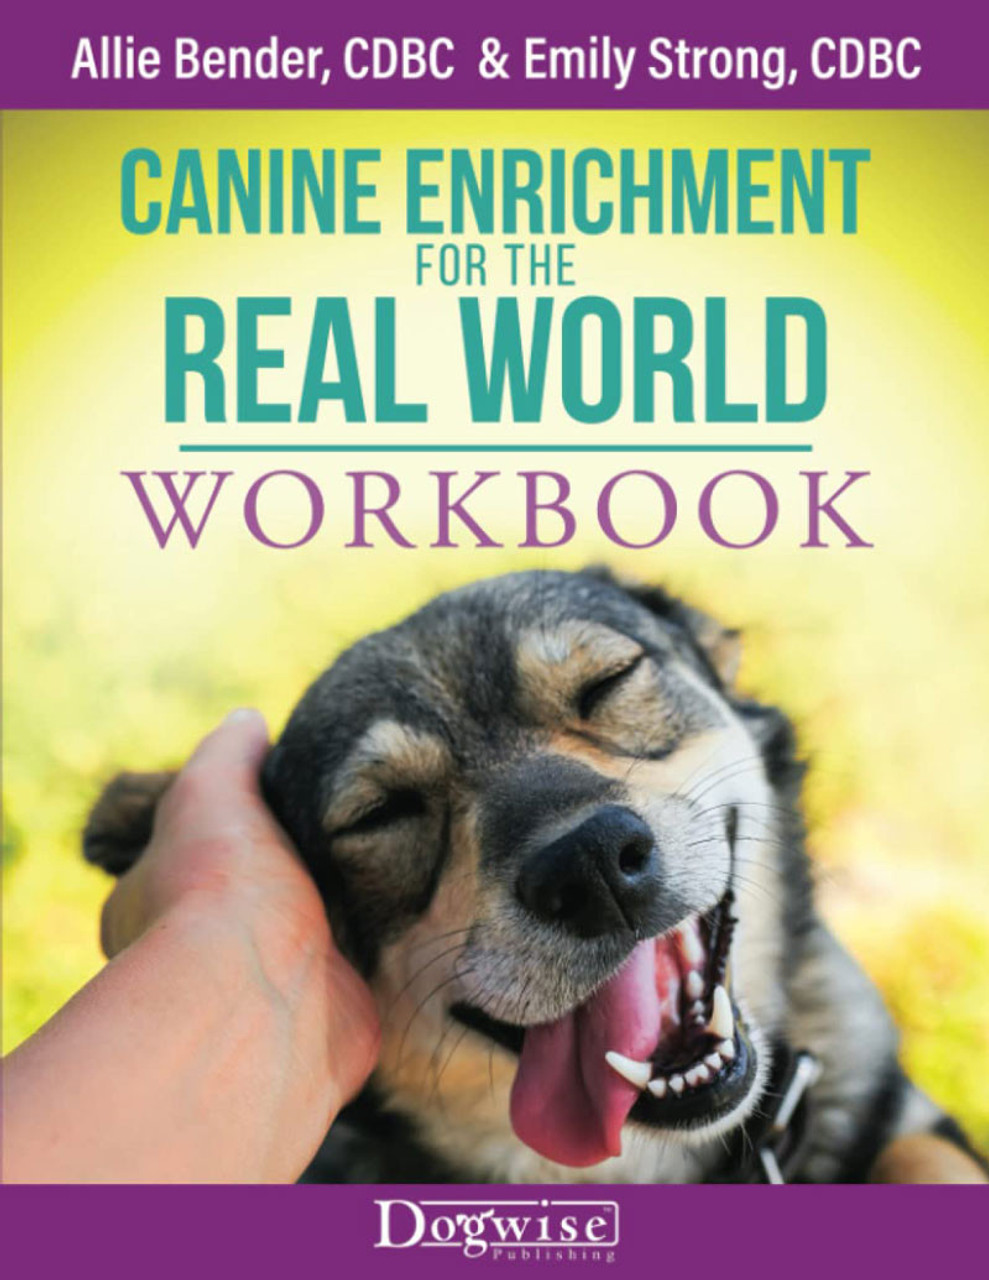 Dogs Disclosed - WHY PROVIDING ENRICHMENT FOR DOGS IS SO IMPORTANT  Enrichment is defined as the action of improving or enhancing the quality  or value of something. Enrichment for dogs is about